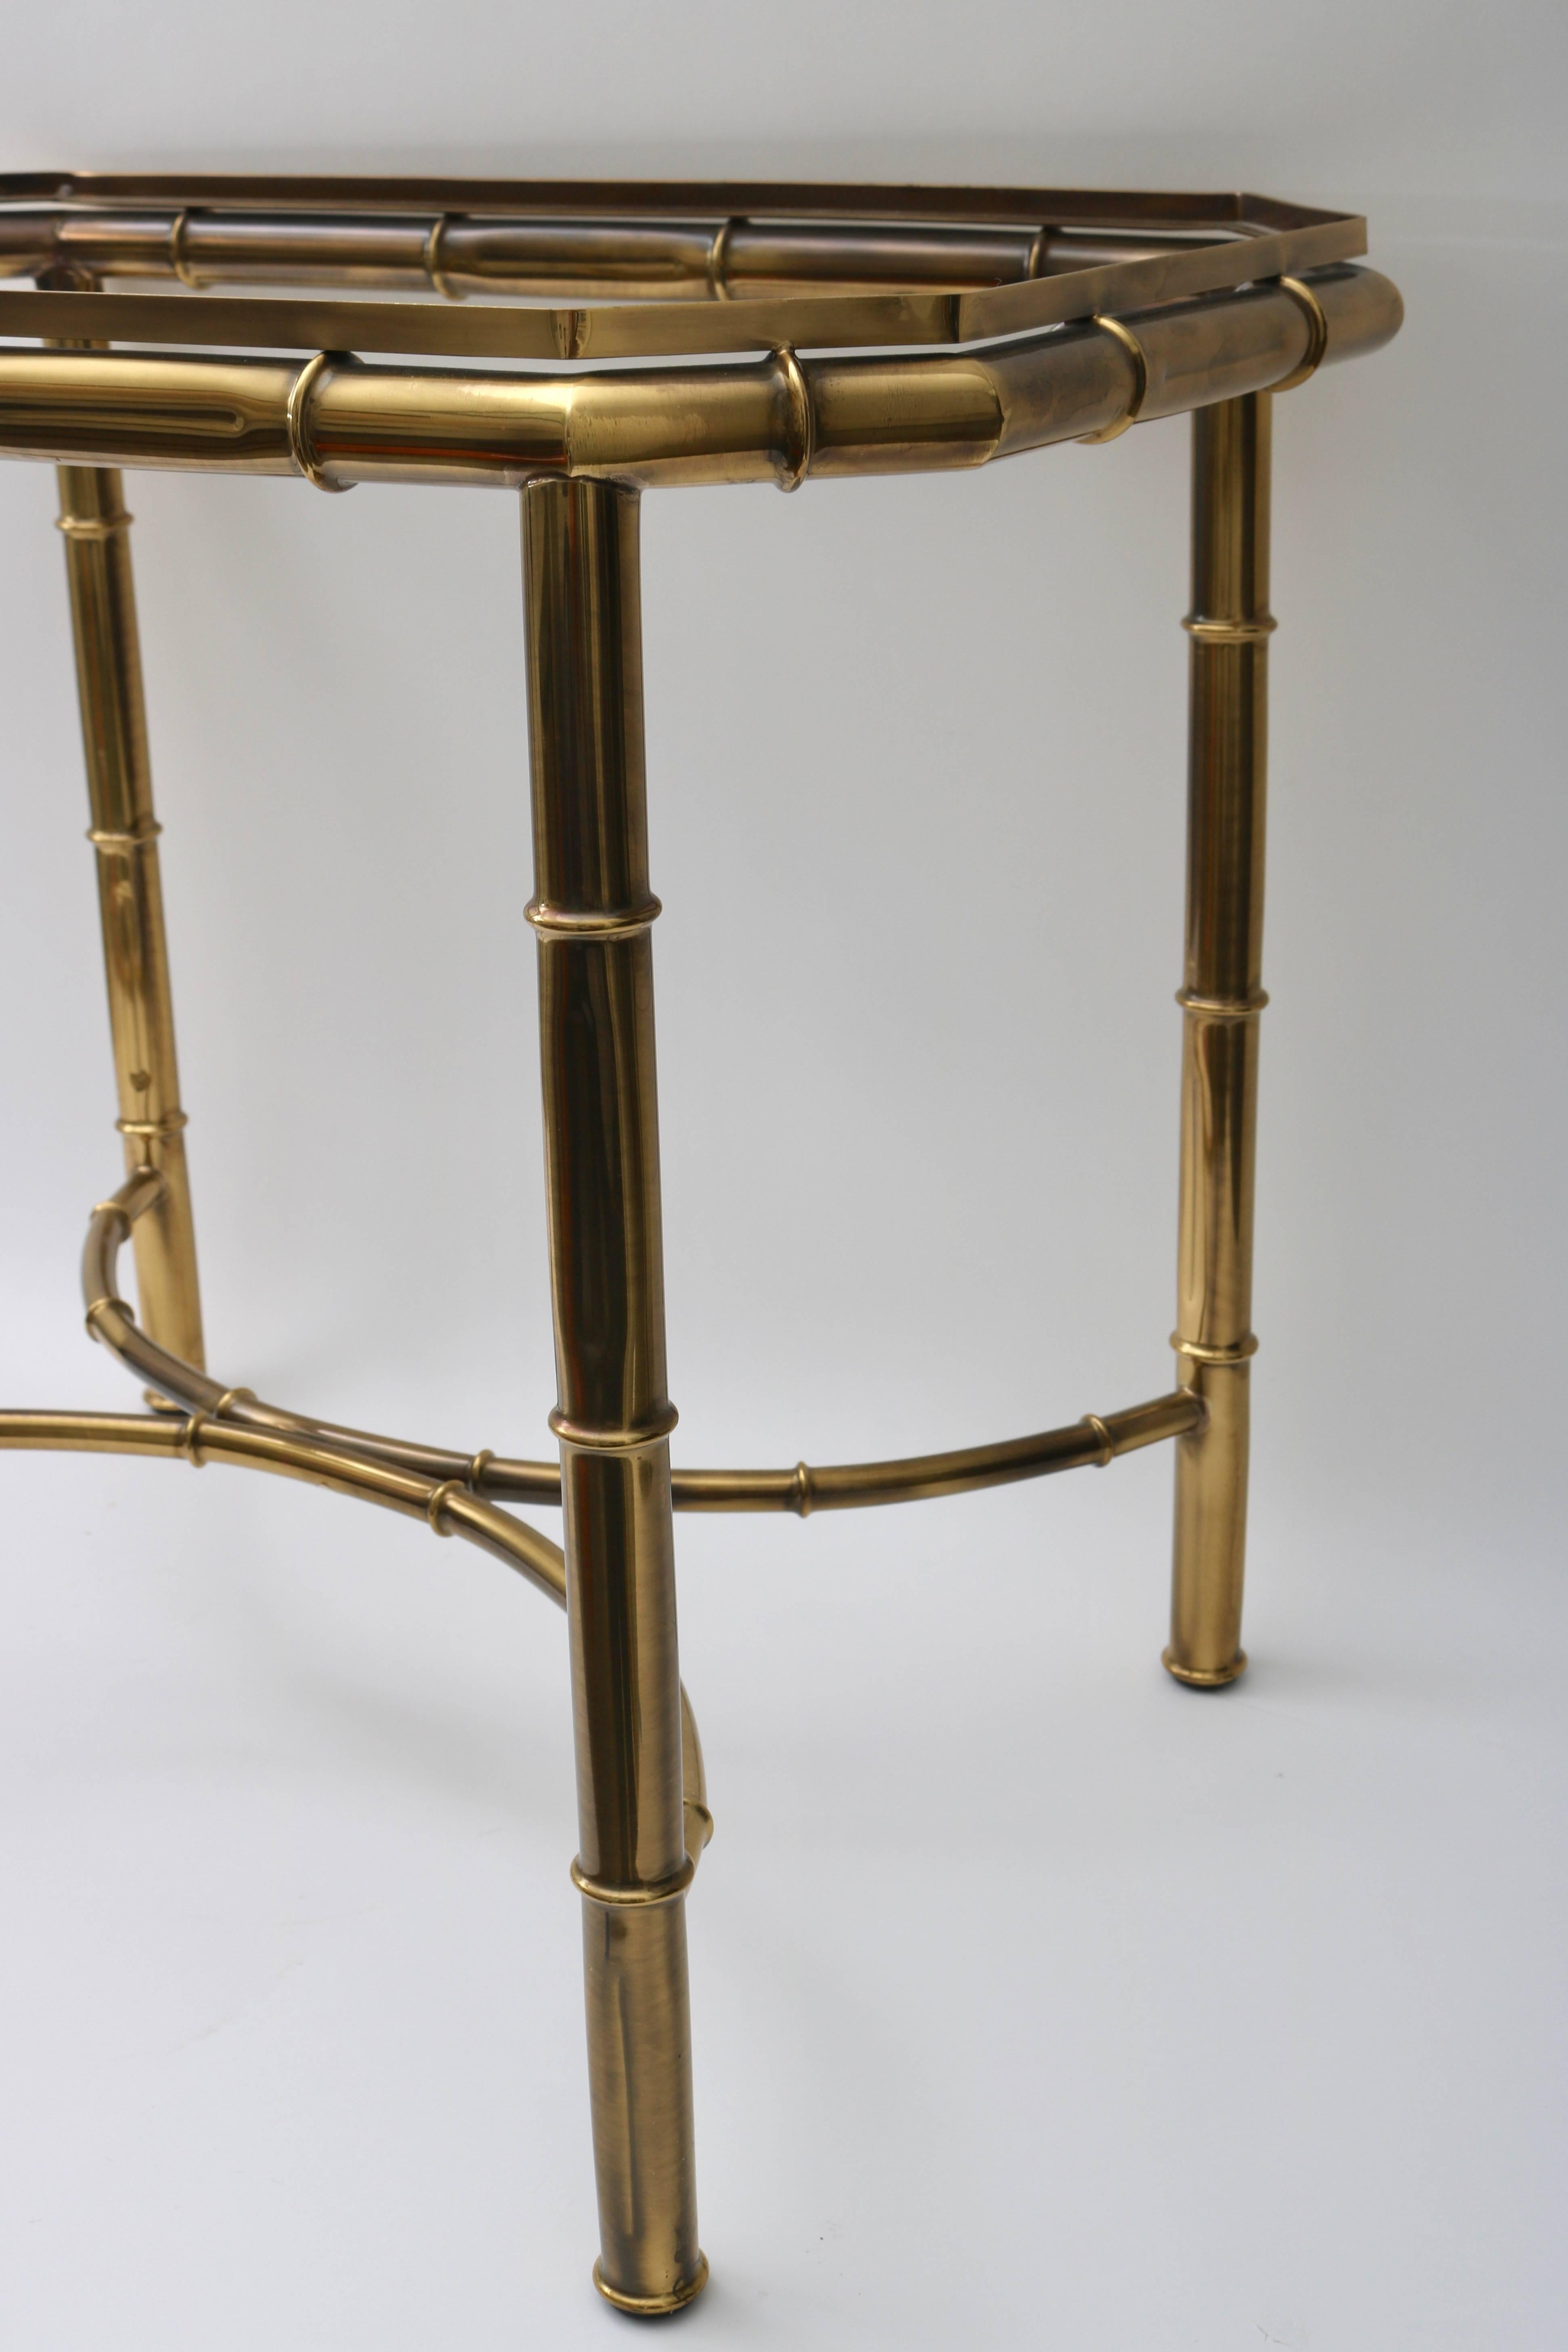 Hollywood Regency Faux Bamboo Tray Table in Antique Brass